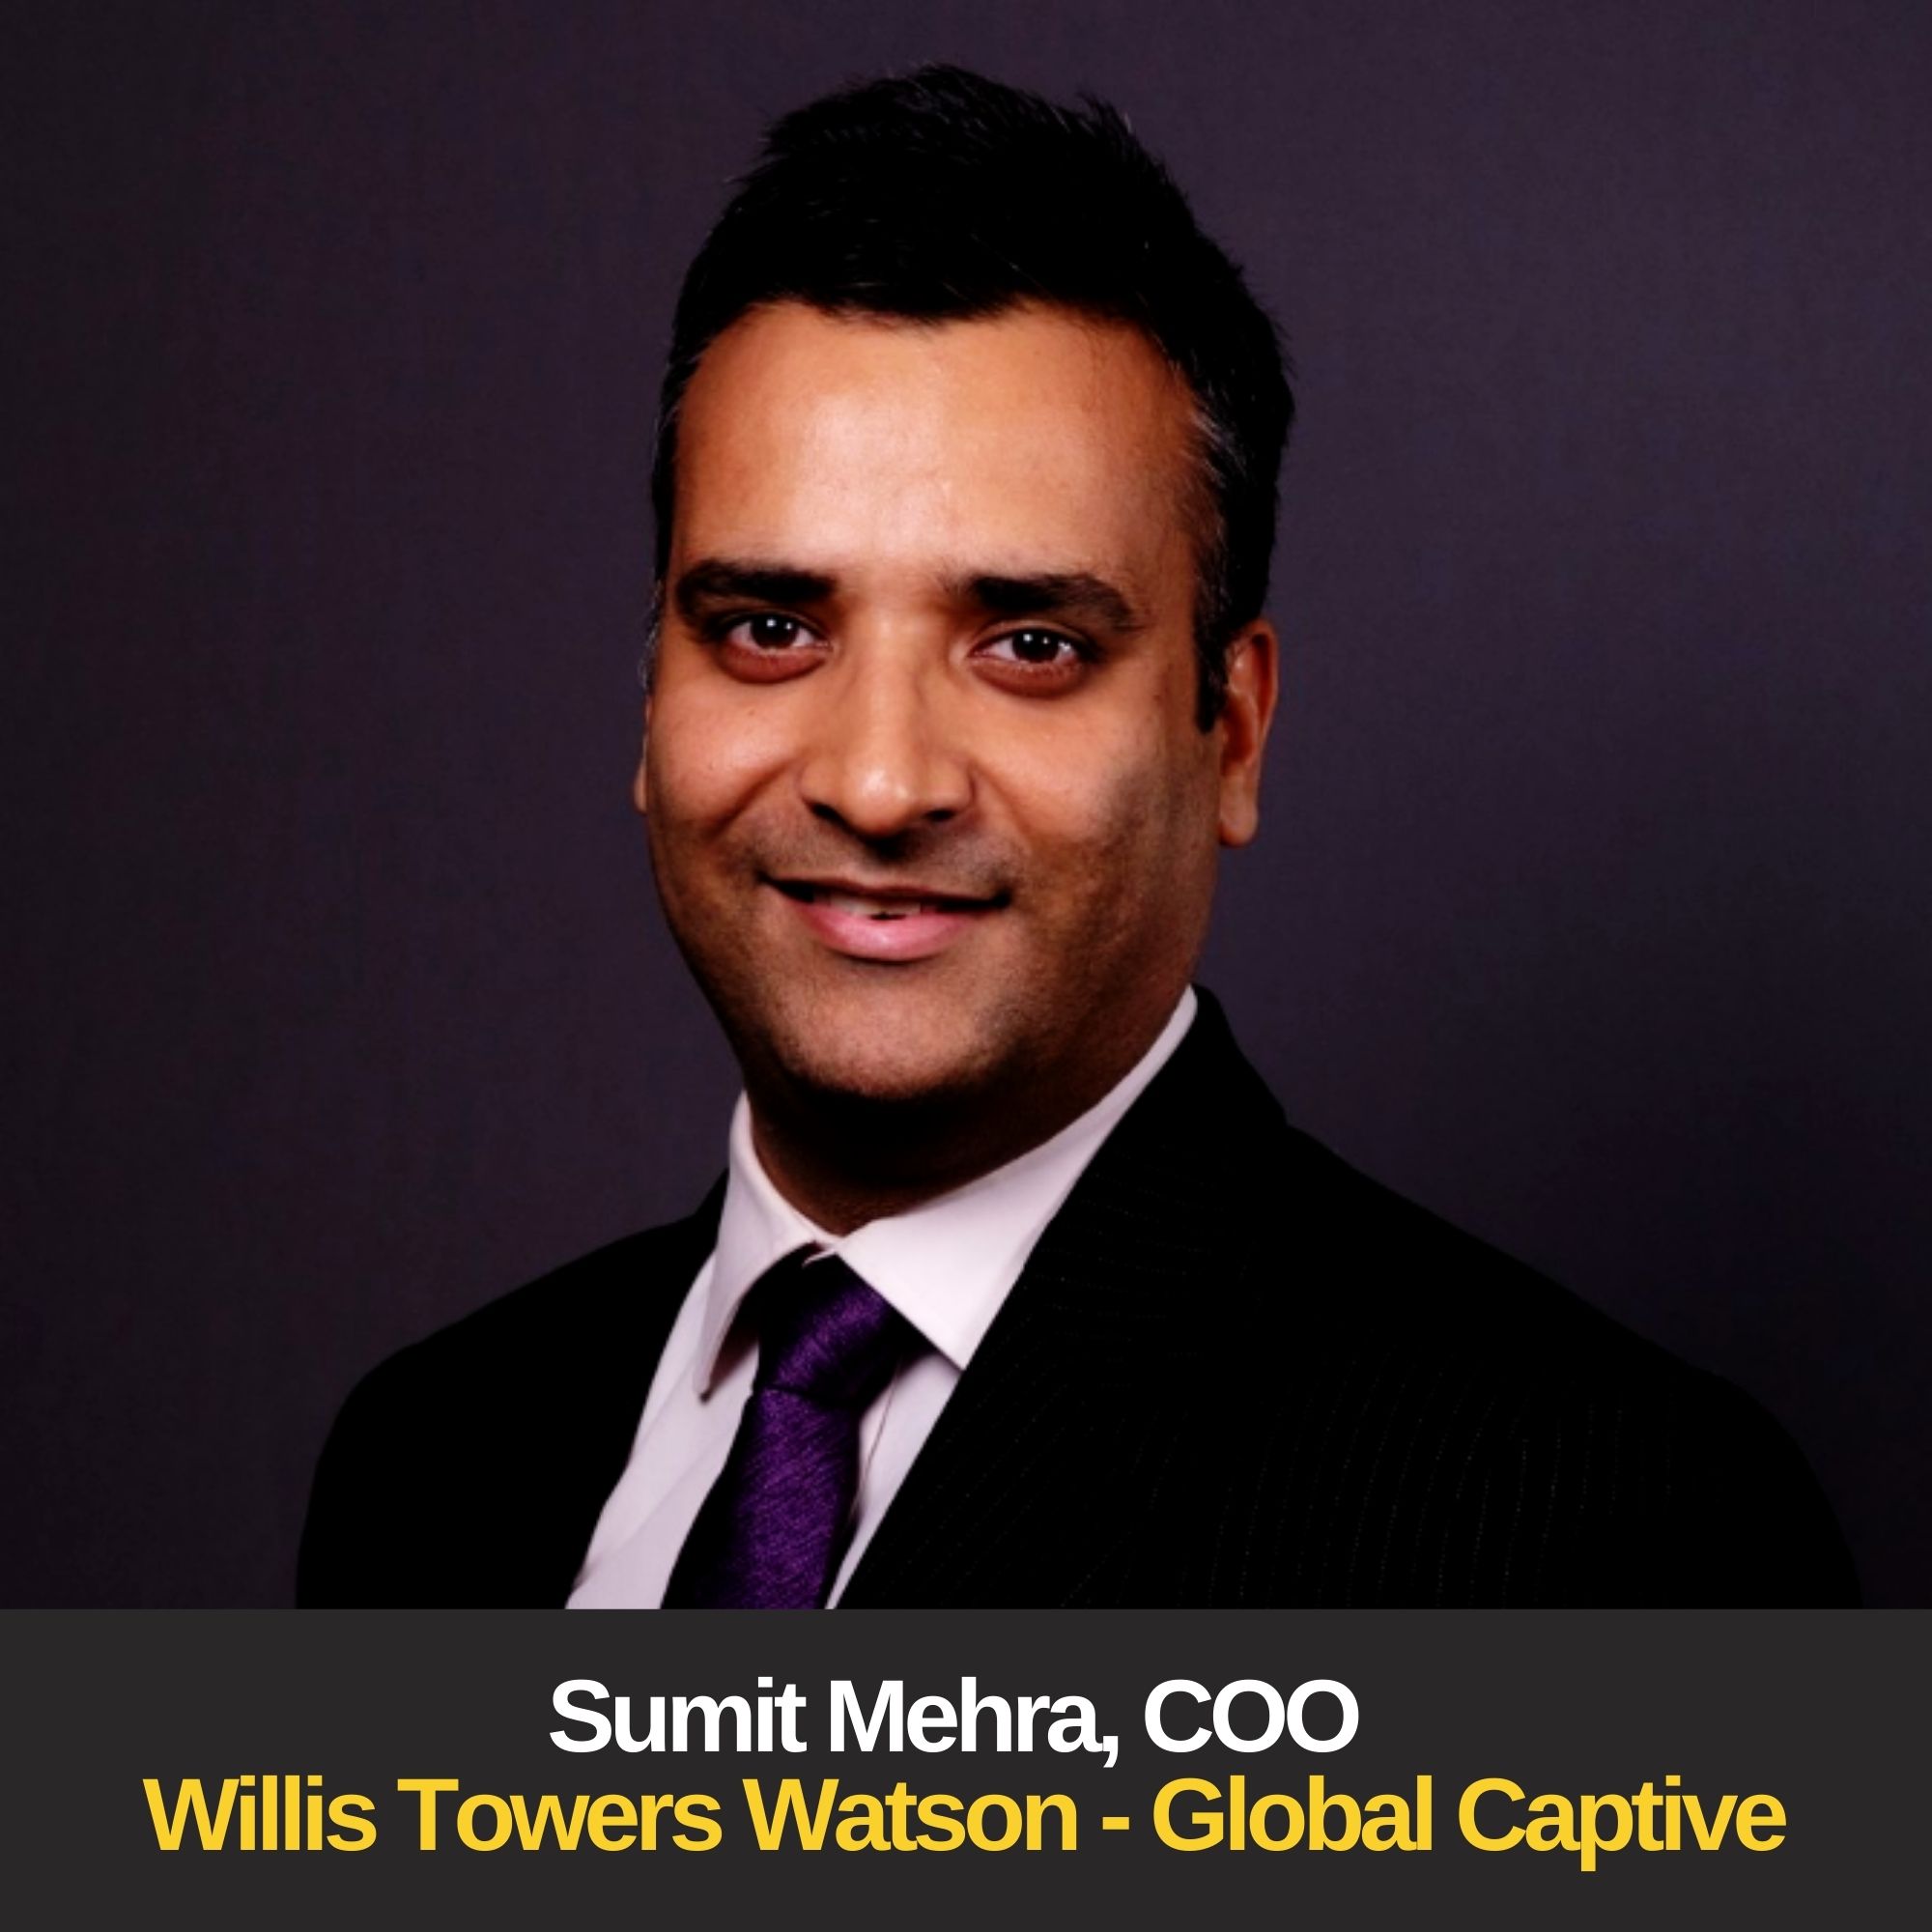 There is opportunity in the Global Captive Market - With Sumit Mehra, COO of Willis Towers Watson Global Captive Practice